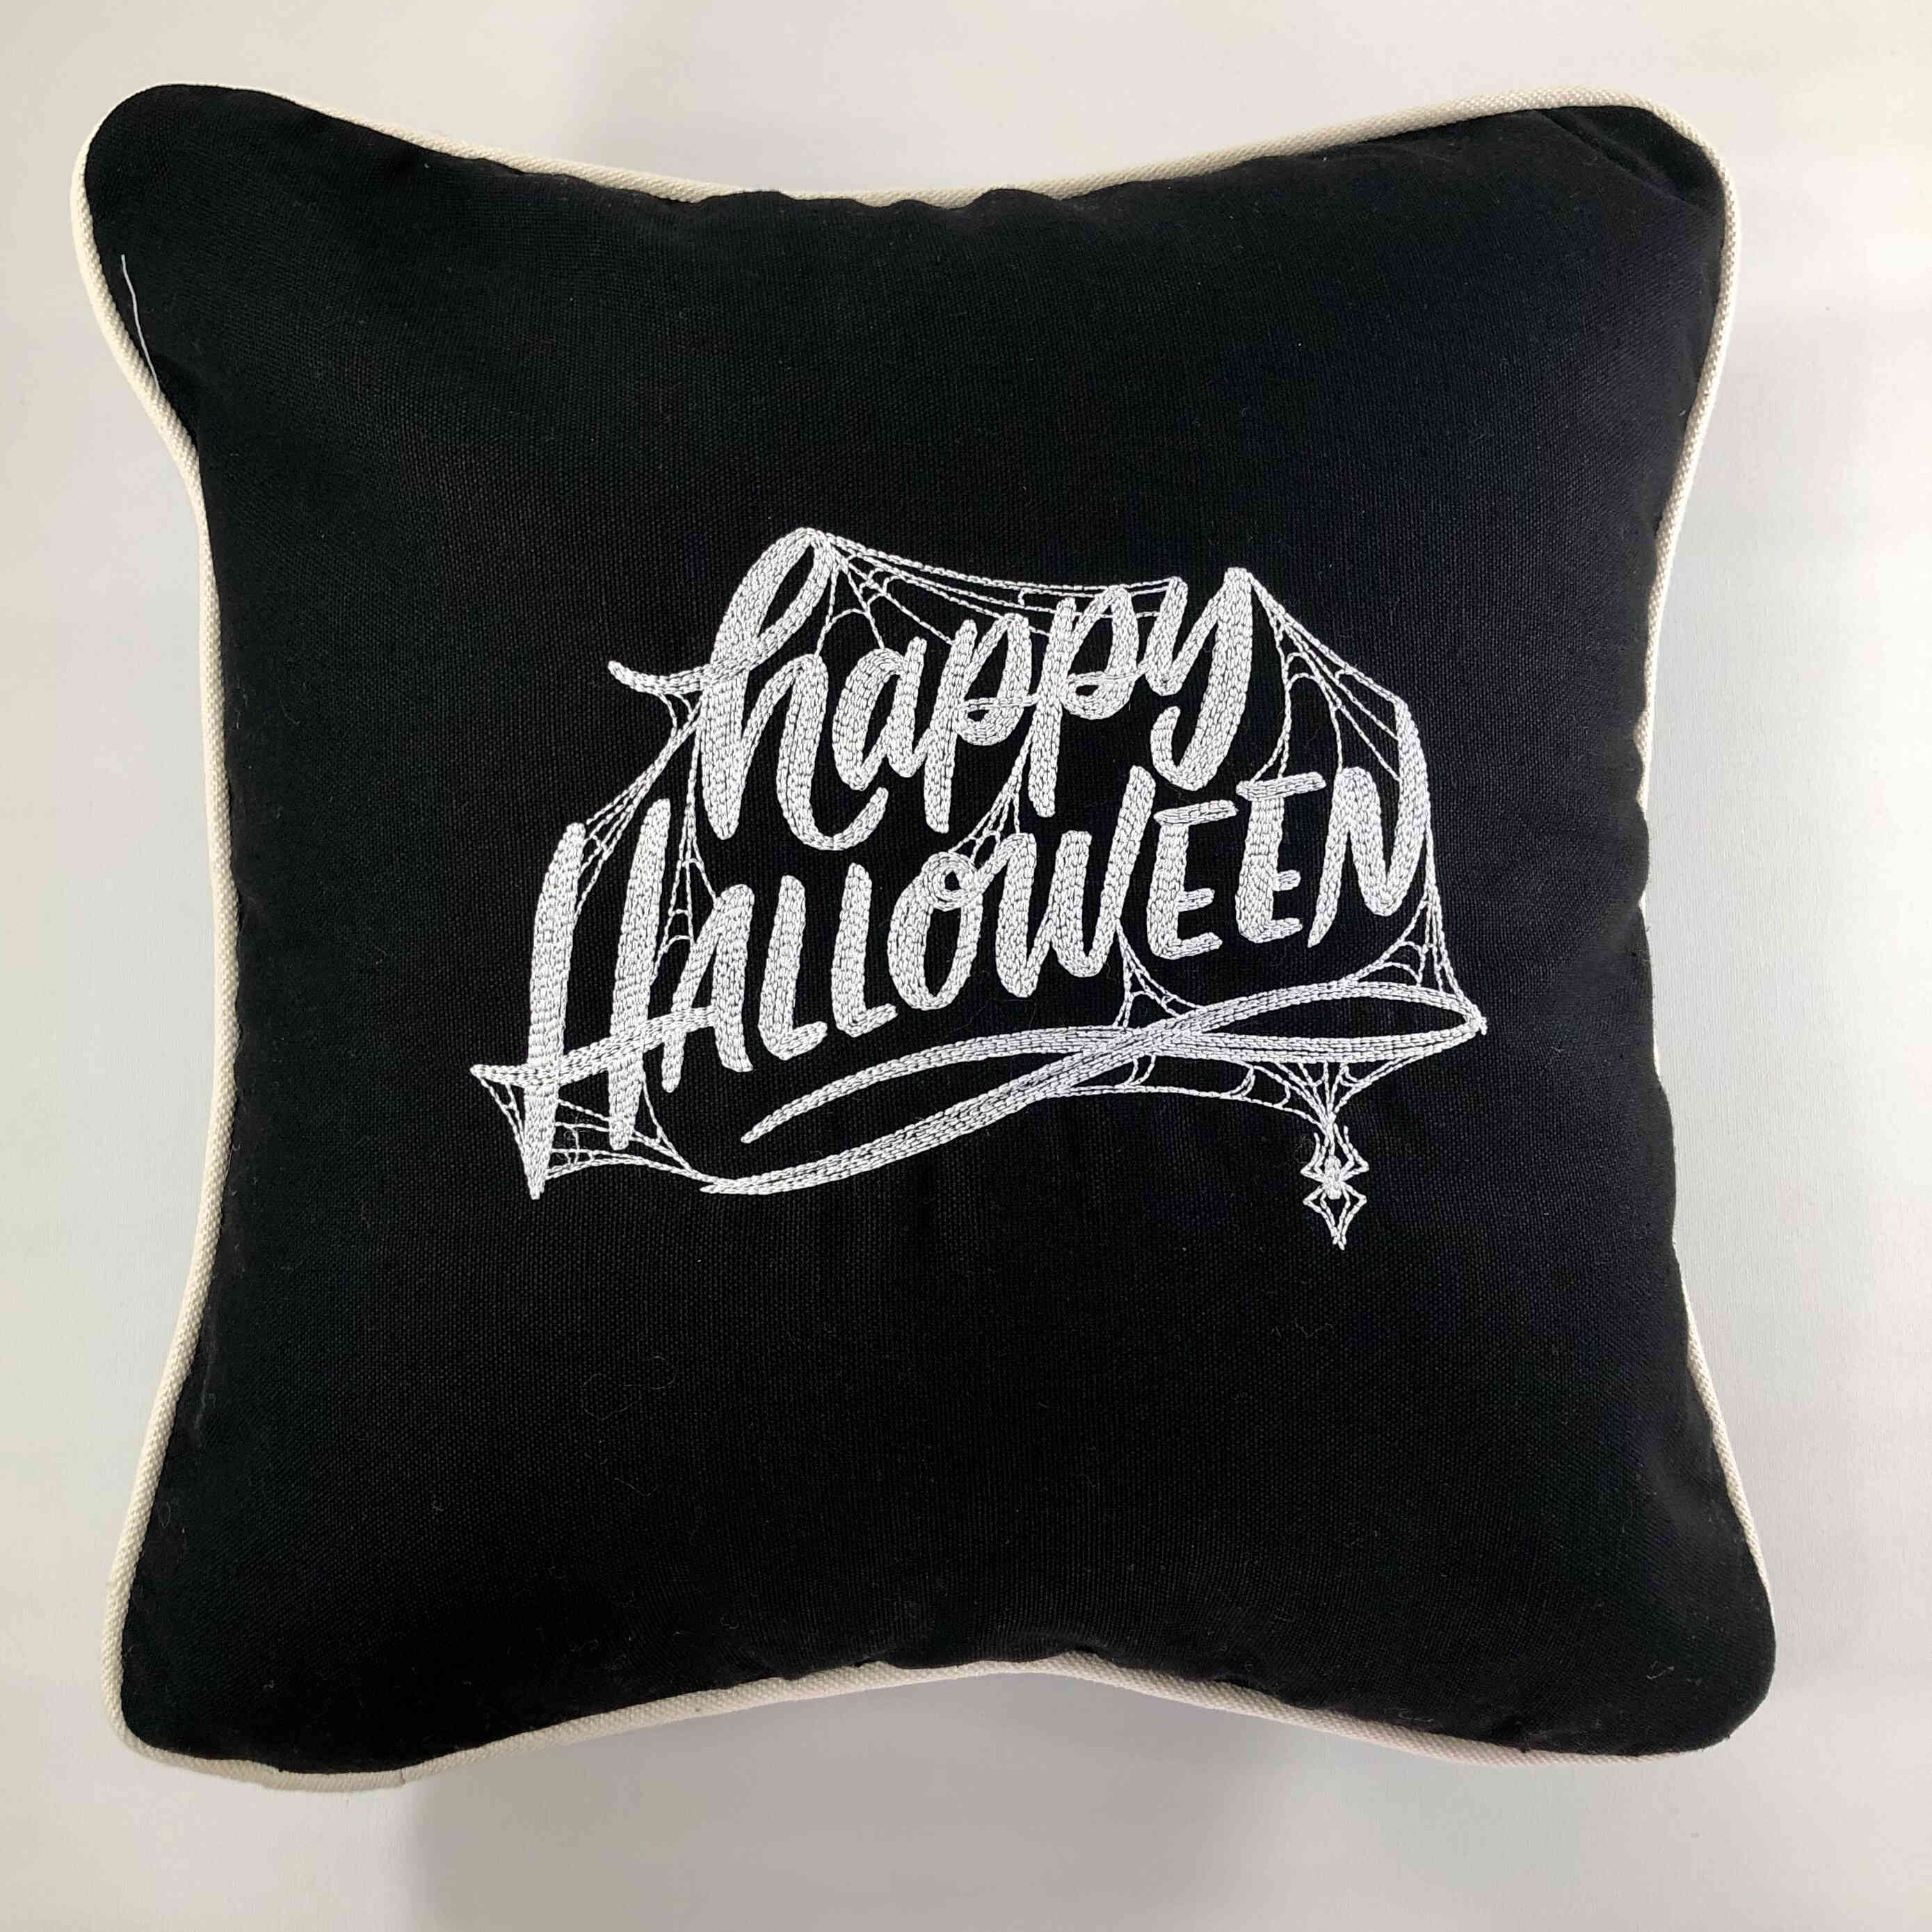 Embroidered Throw Pillow - "Happy Halloween"